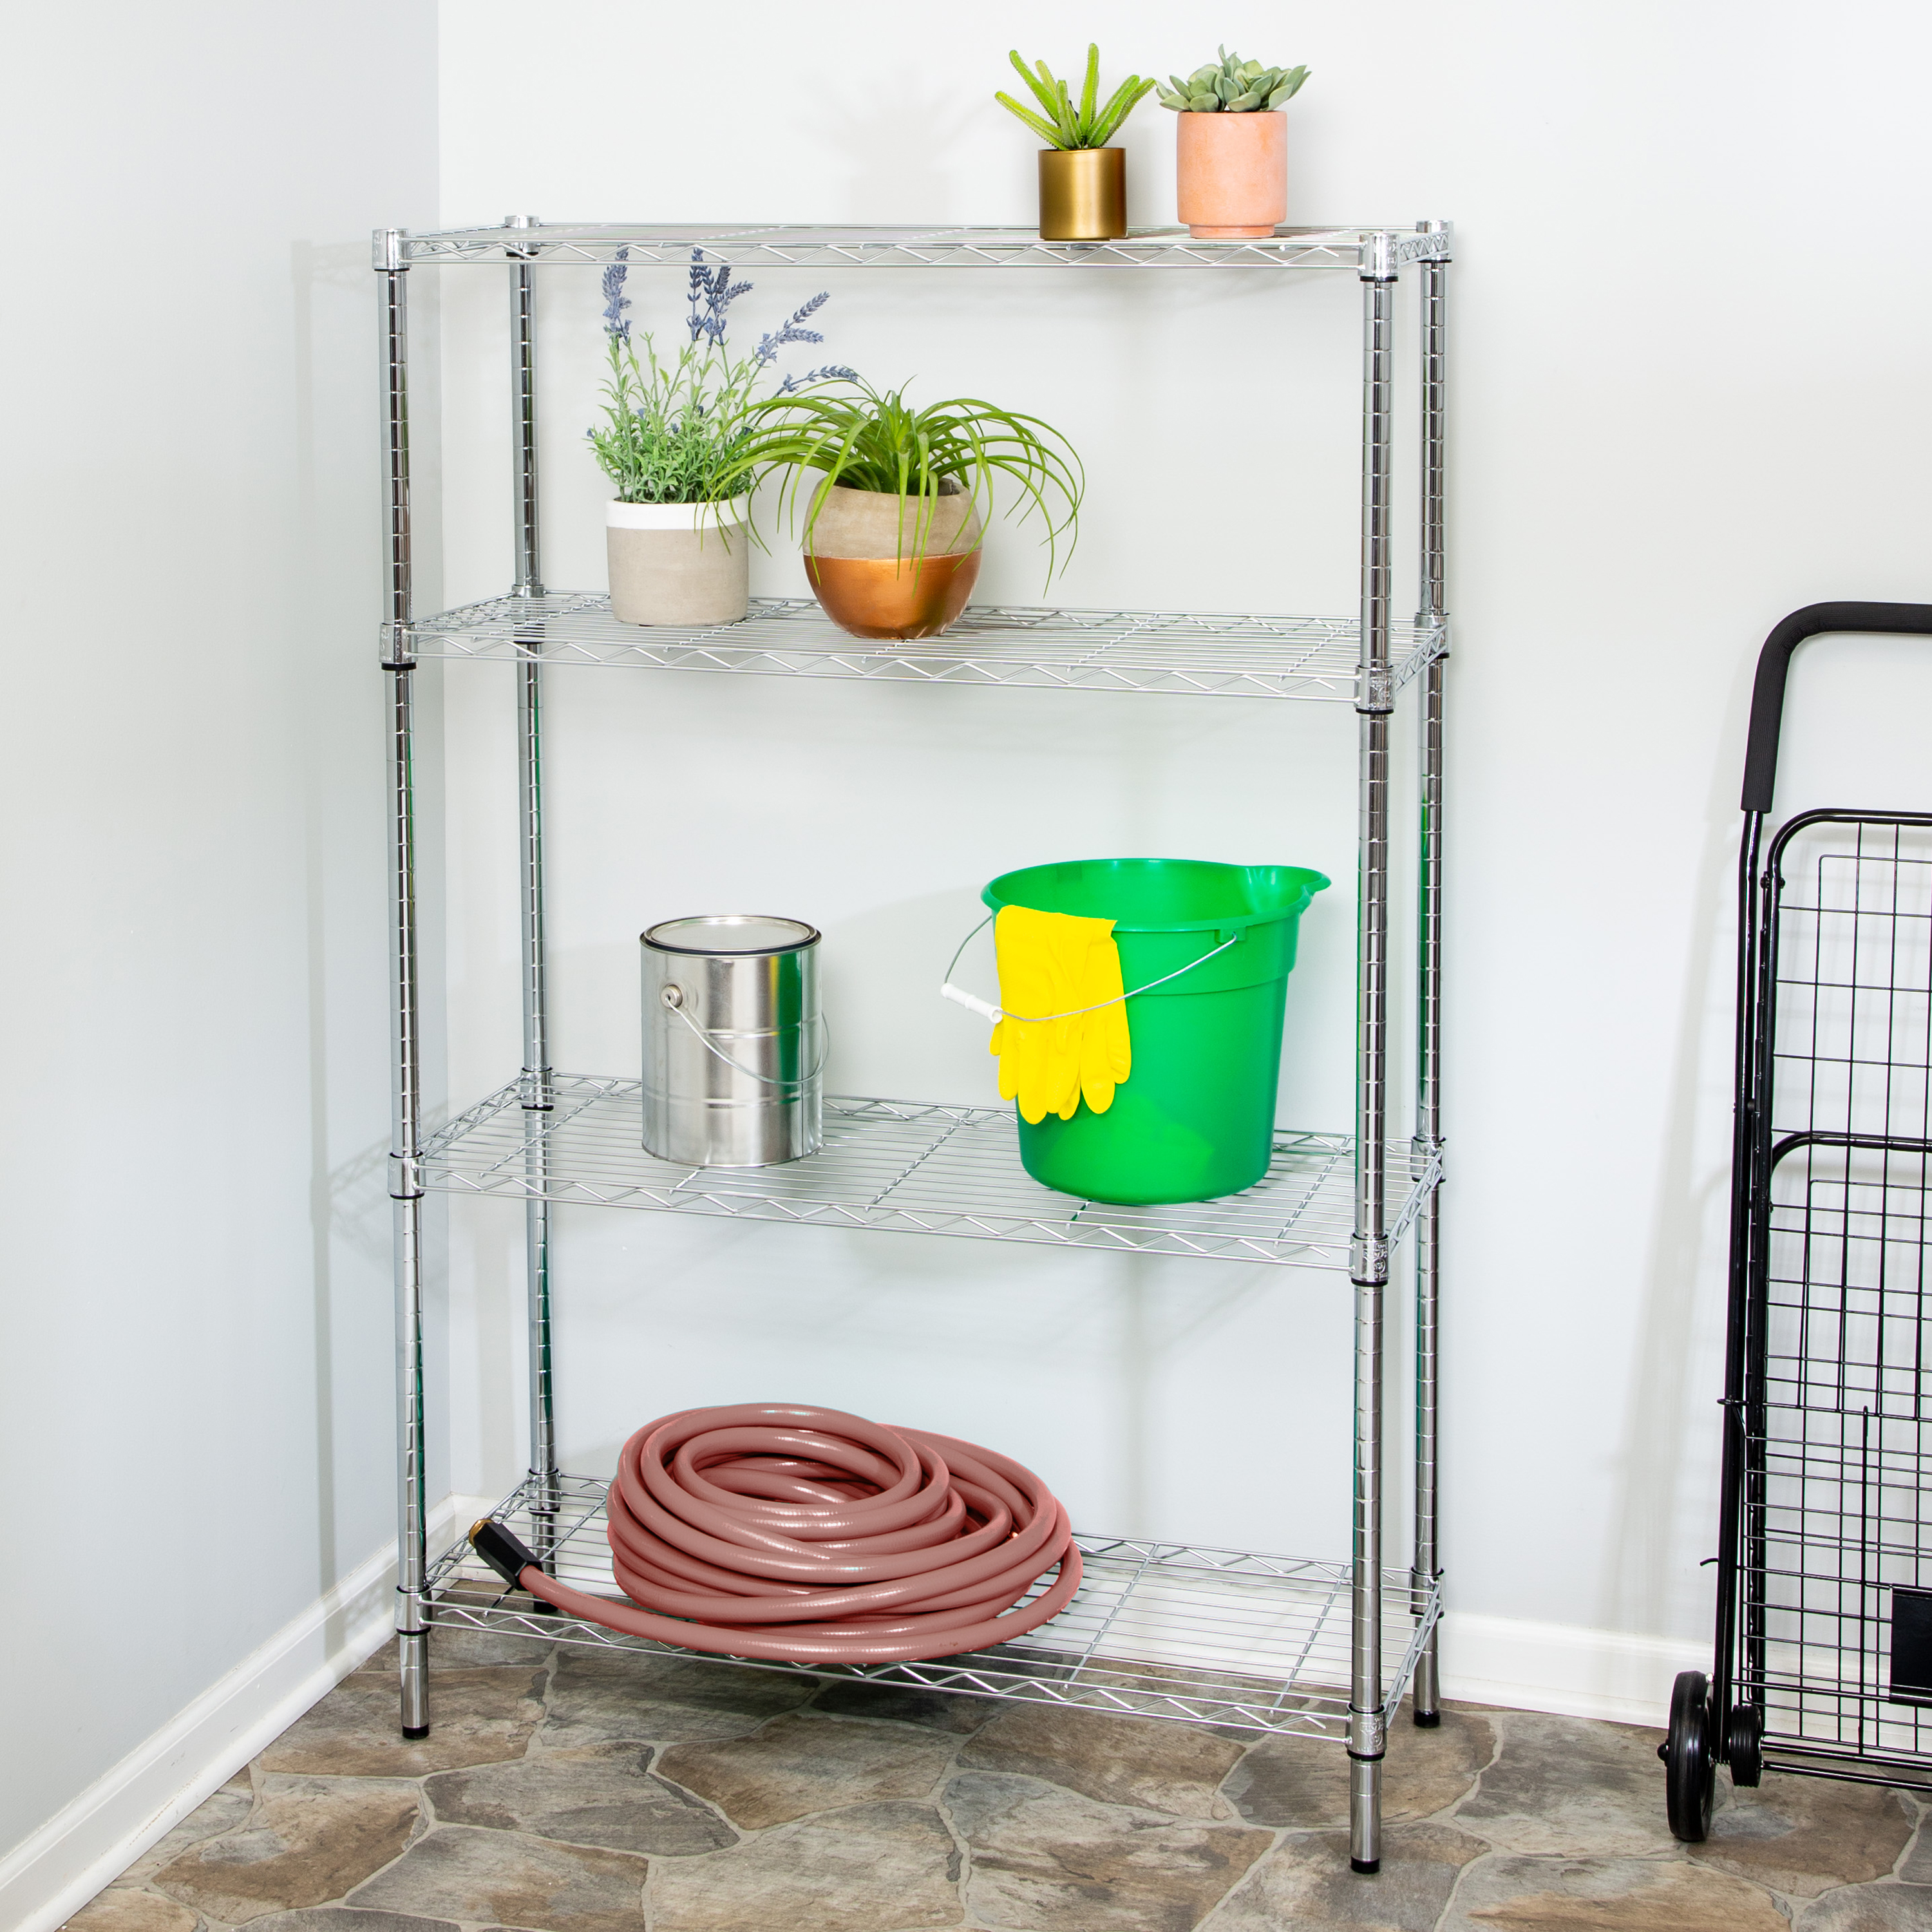 Honey Can Do 4-Tier Heavy-Duty Adjustable Shelving Unit With 250-Lb Weight Capacity, Chrome, Basement/Garage - image 5 of 5